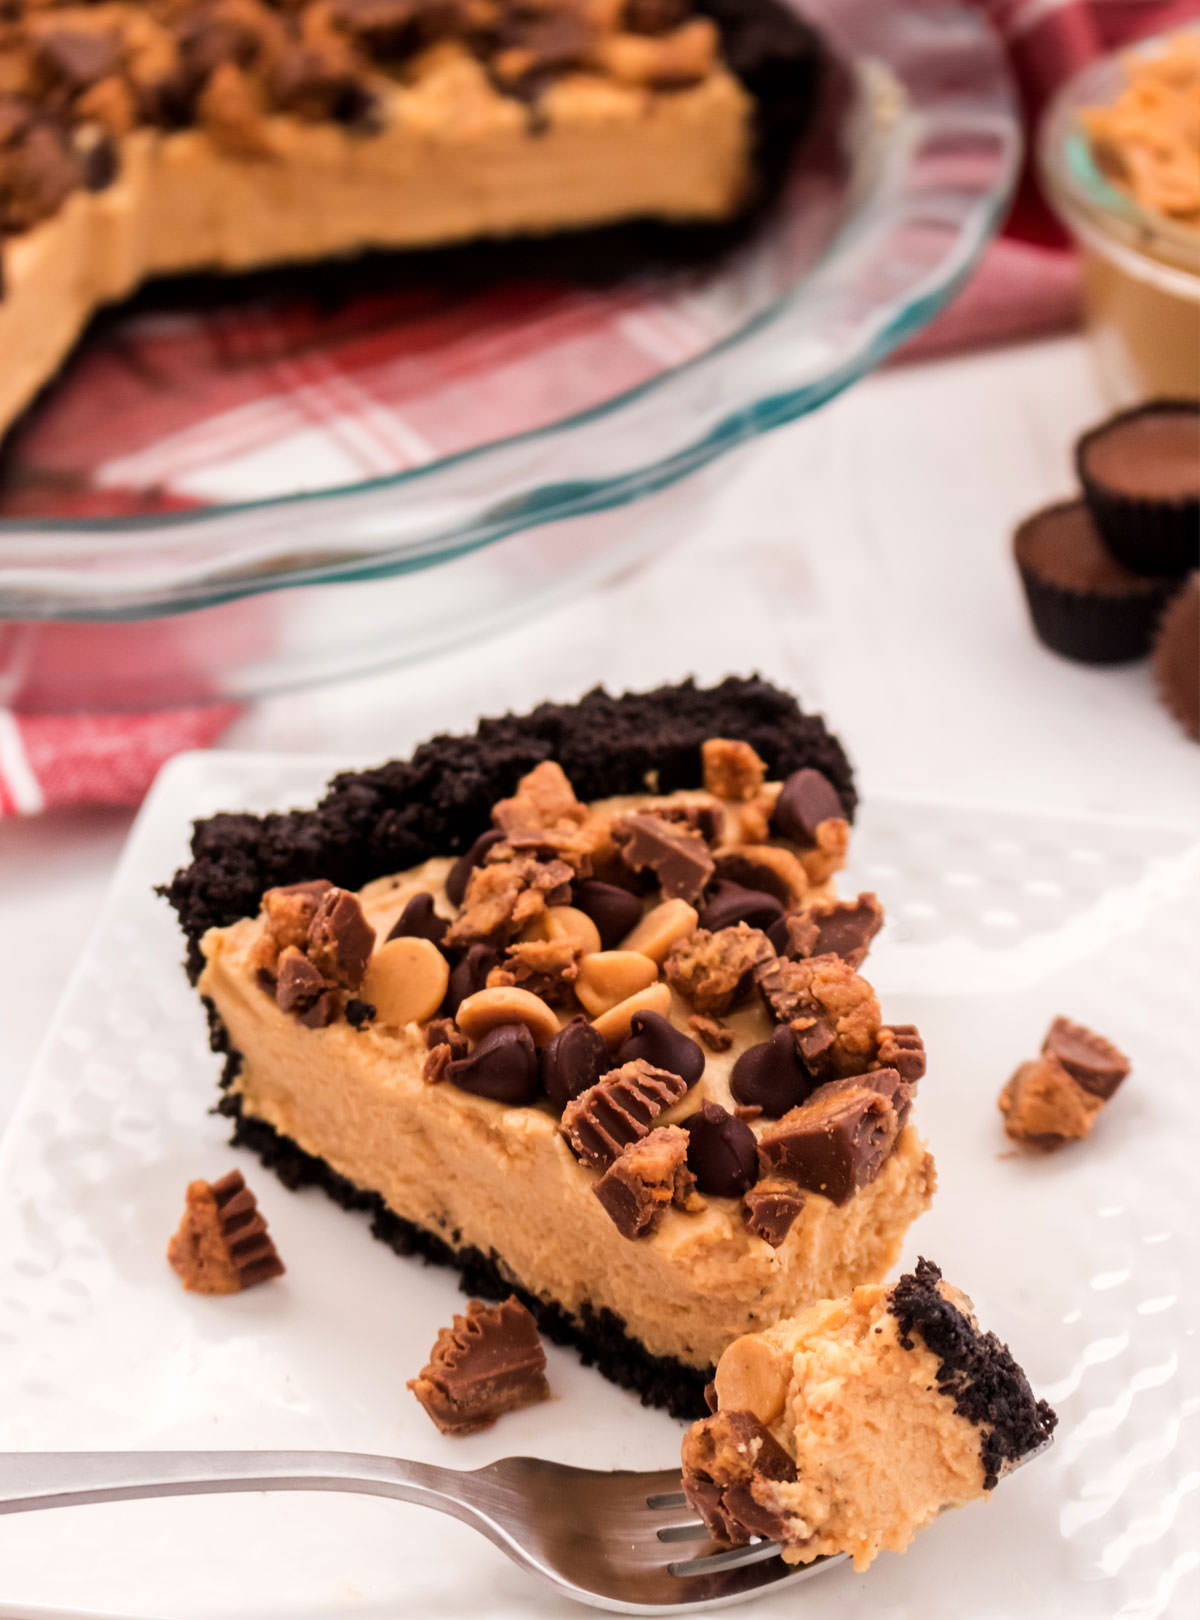 Closeup on a single piece of Peanut Butter Pie on a white plate with a fork with a piece of the pie on it.